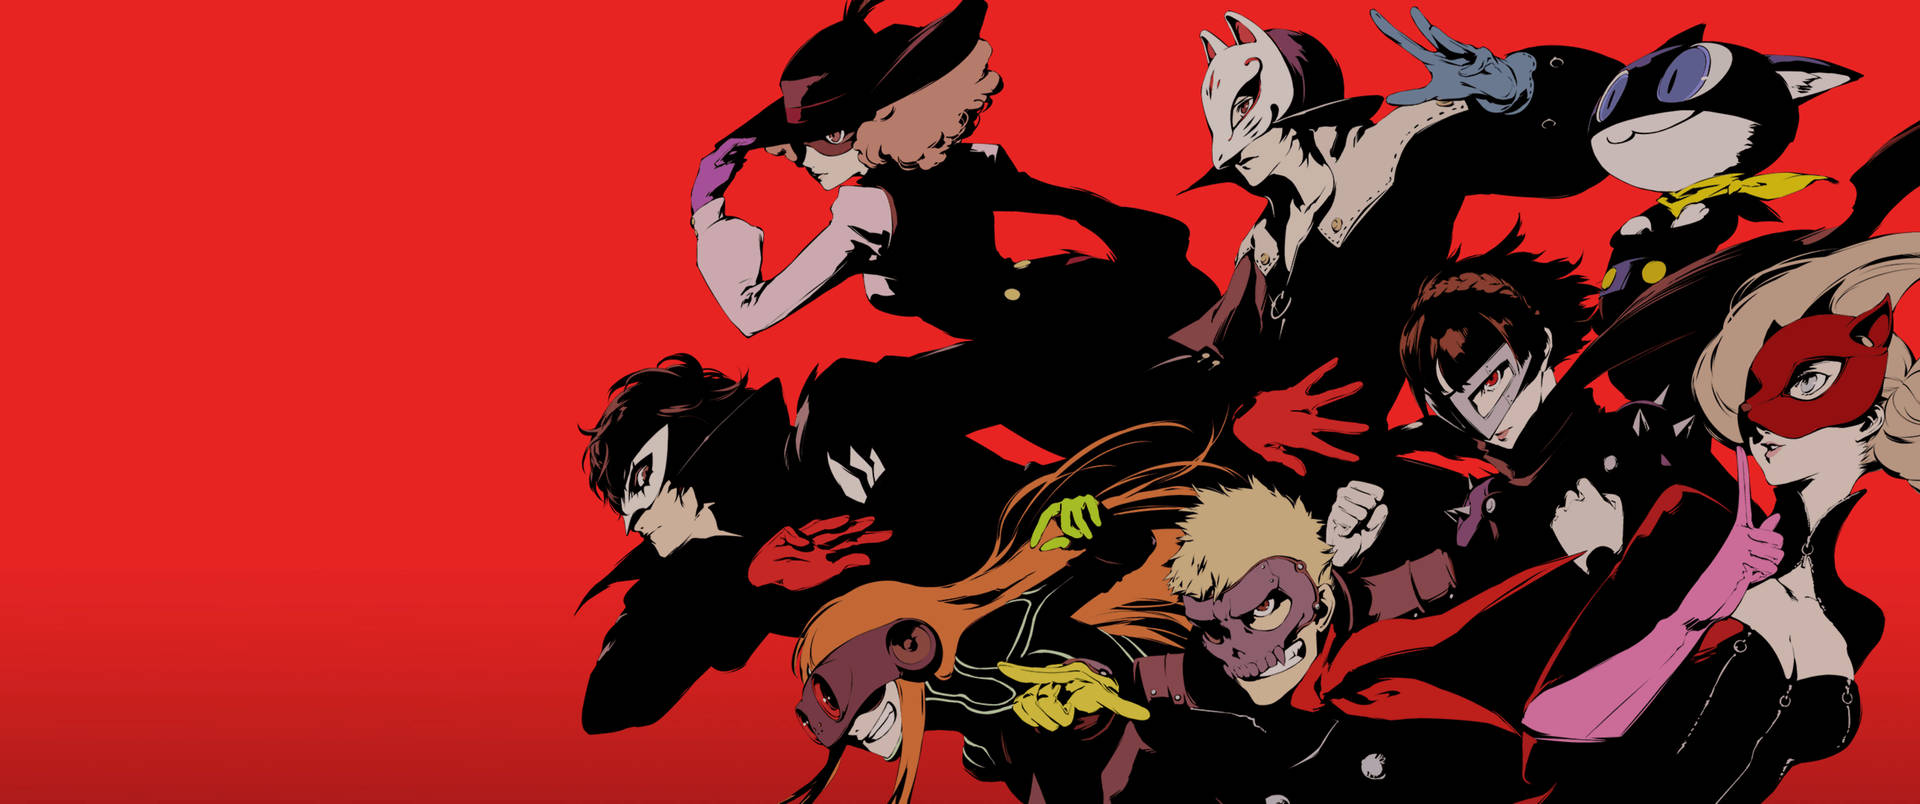 Join the Phantom Thieves of Persona 5! Wallpaper